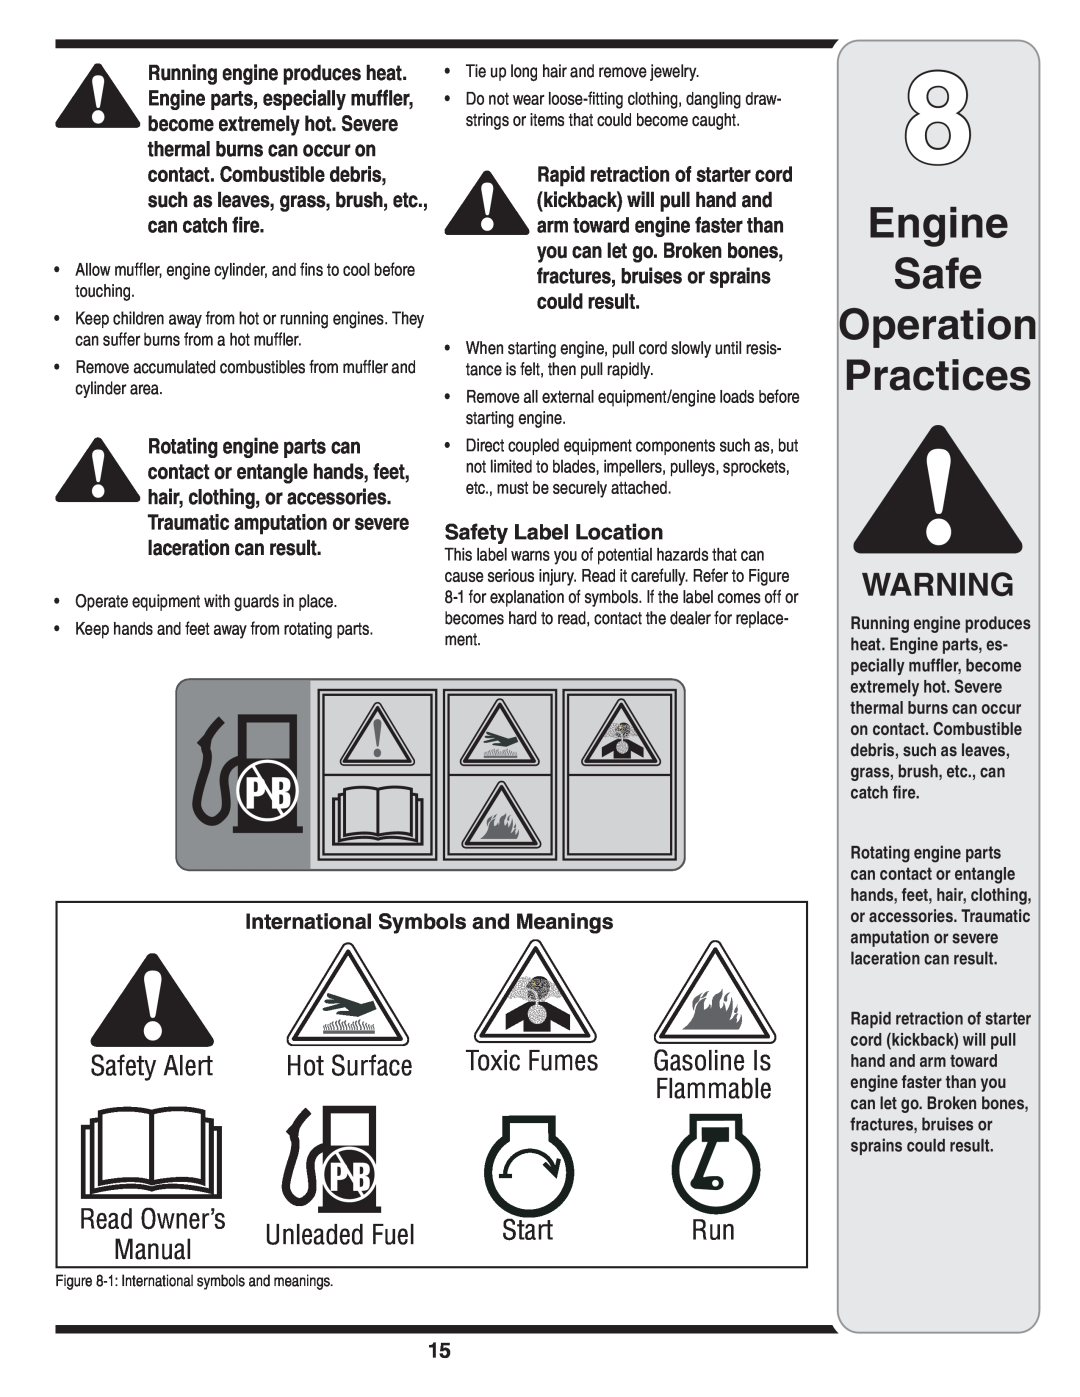 MTD 54M warranty Safety Label Location, International Symbols and Meanings, Engine Safe Operation Practices 